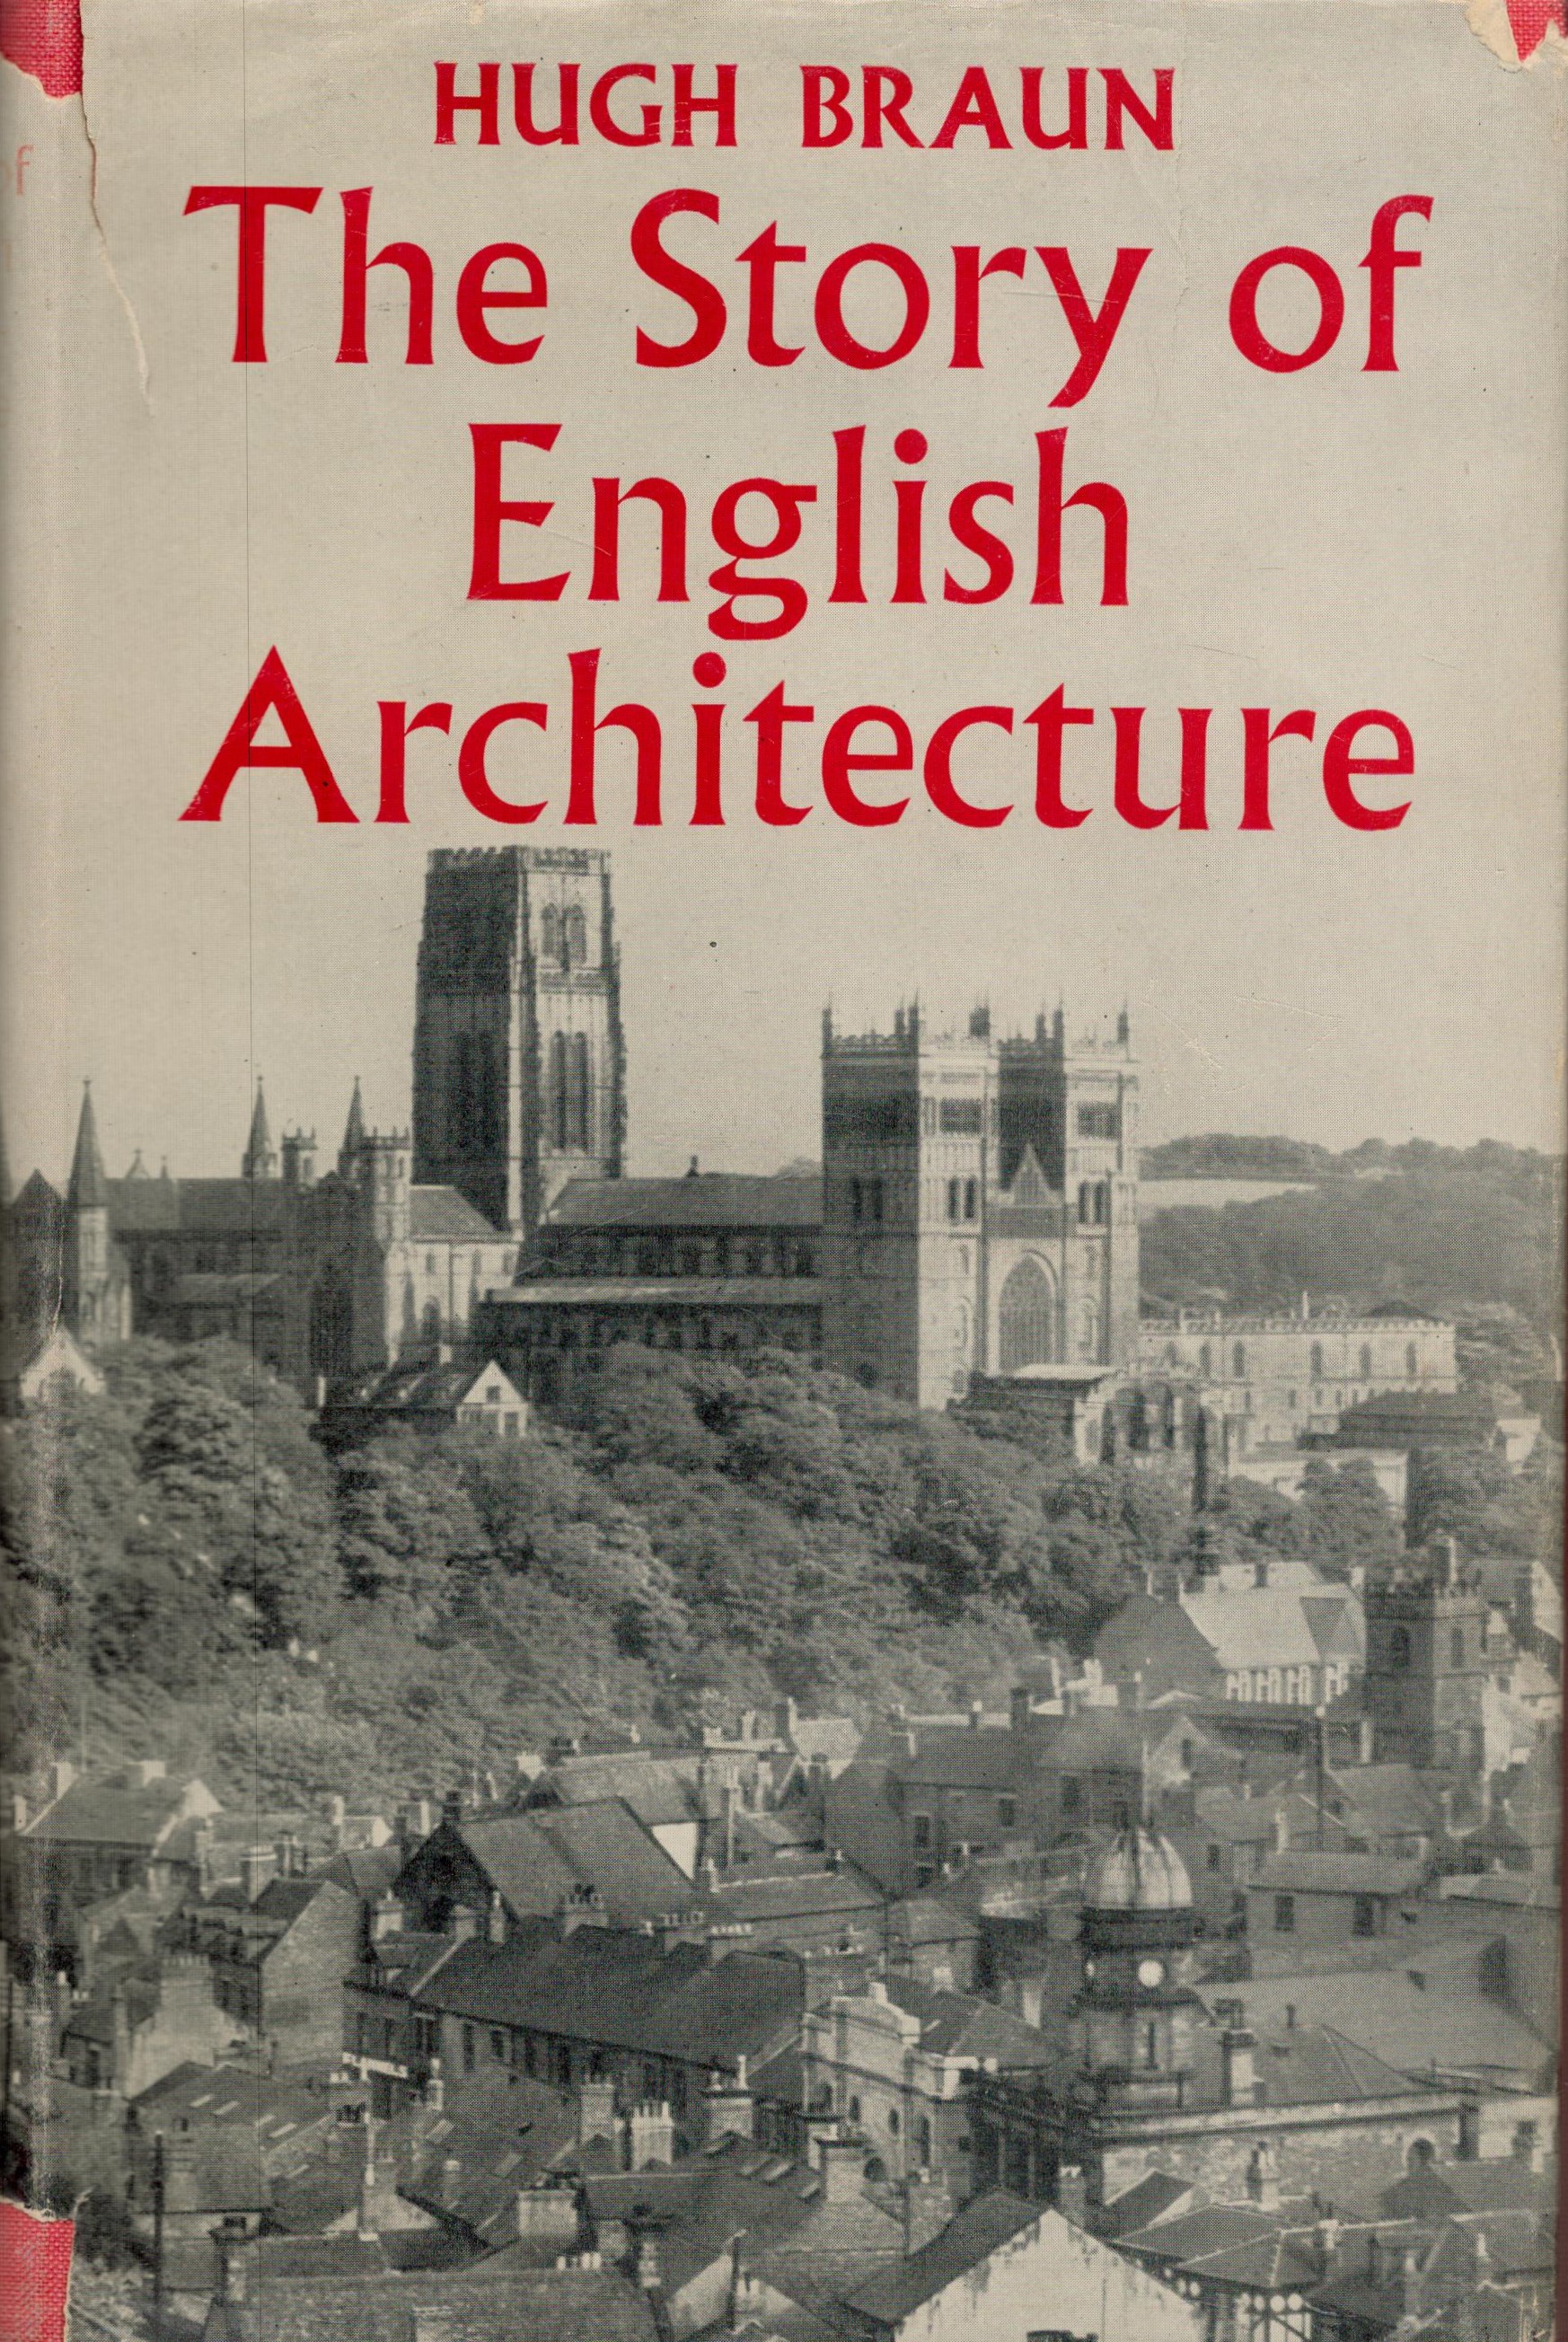 The Story of English Architecture by Hugh Braun 1950 First Edition Hardback Book with 200 pages